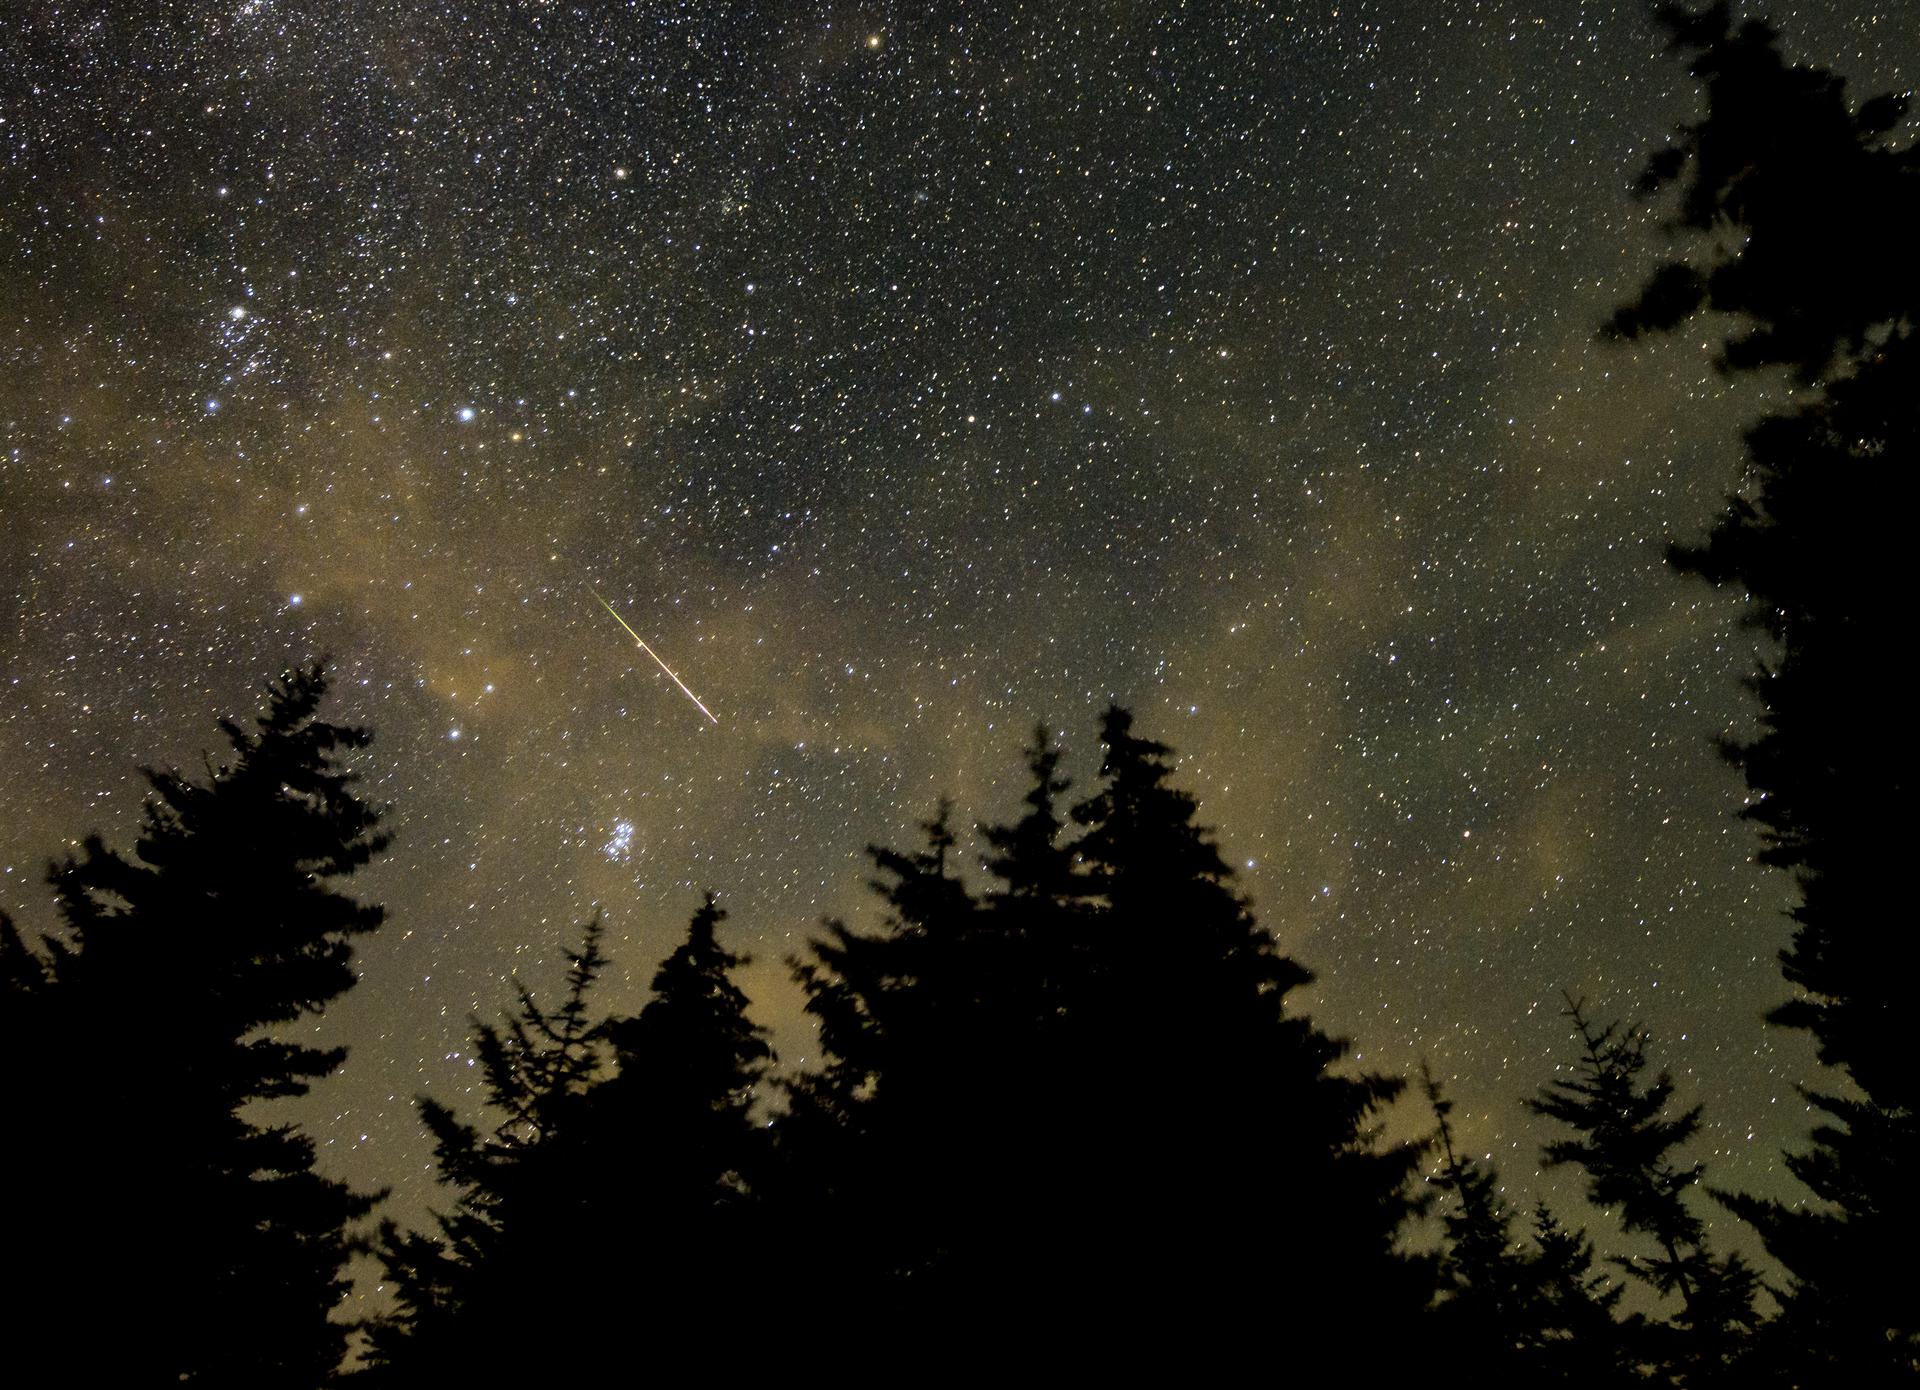 A Perseid meteor is seen in the sky above West Virginia on 11 August, 2021